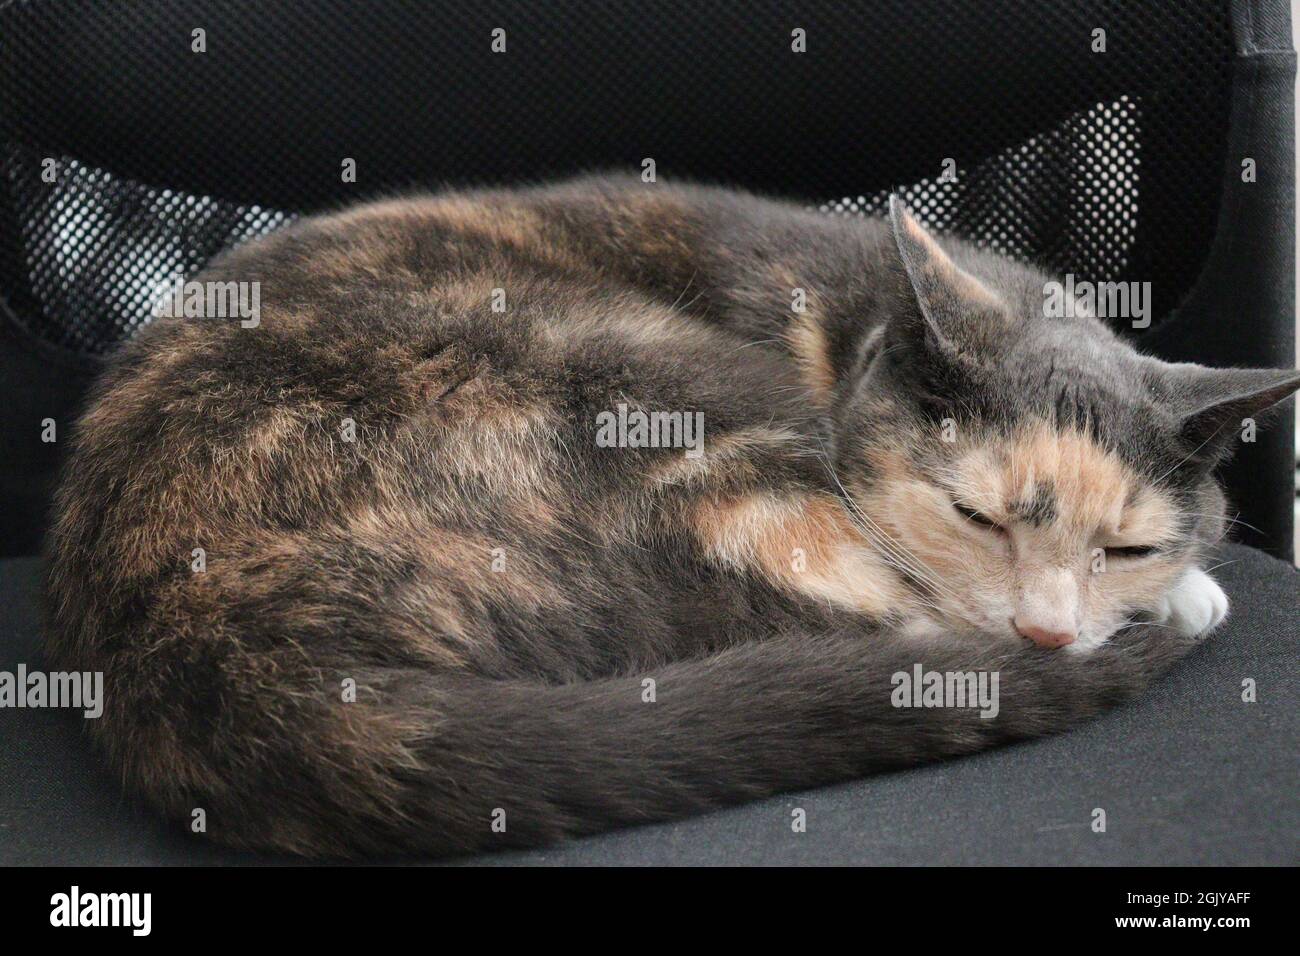 A sleeping cate Curled up into a ball. Stock Photo